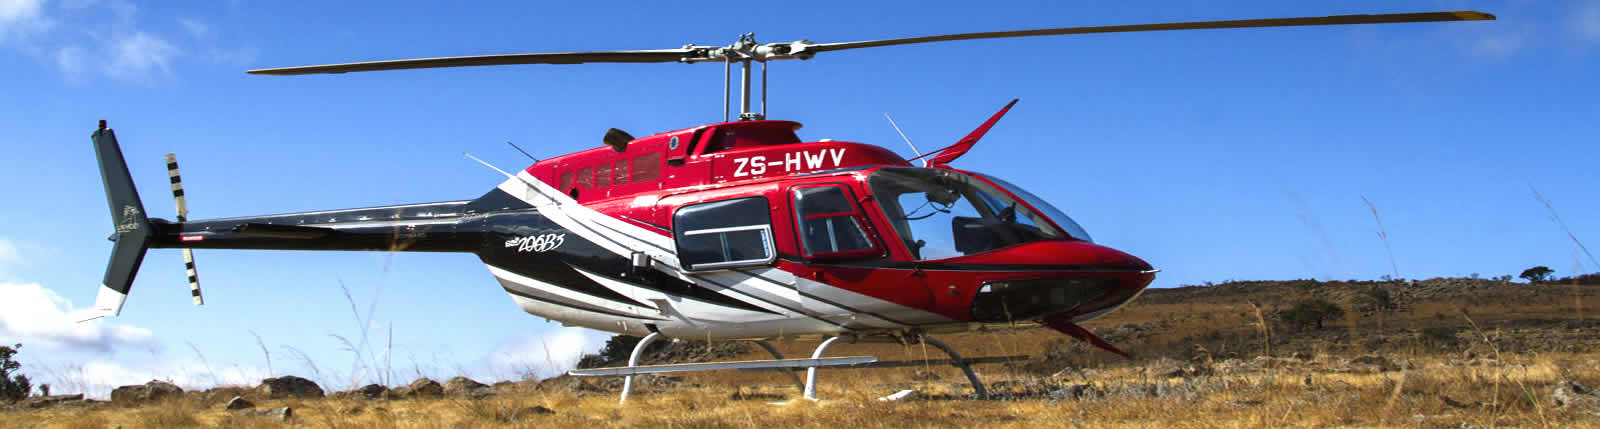 Sunrise Aviation offers Corporate and private helicopter charters and transfers